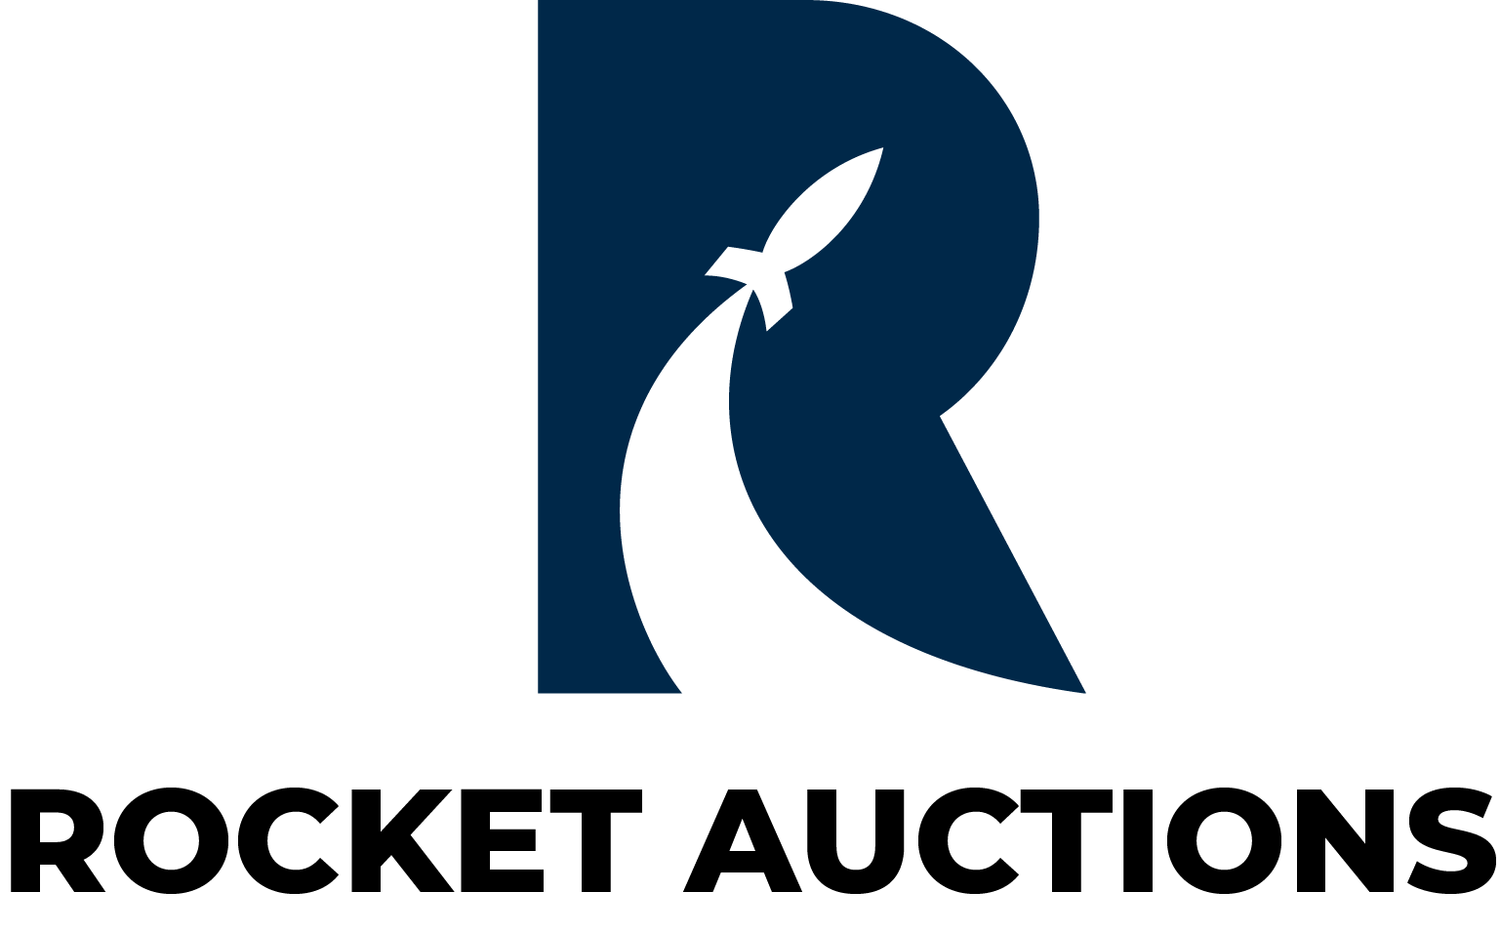 Rocket Auctions - The fully managed online auction service